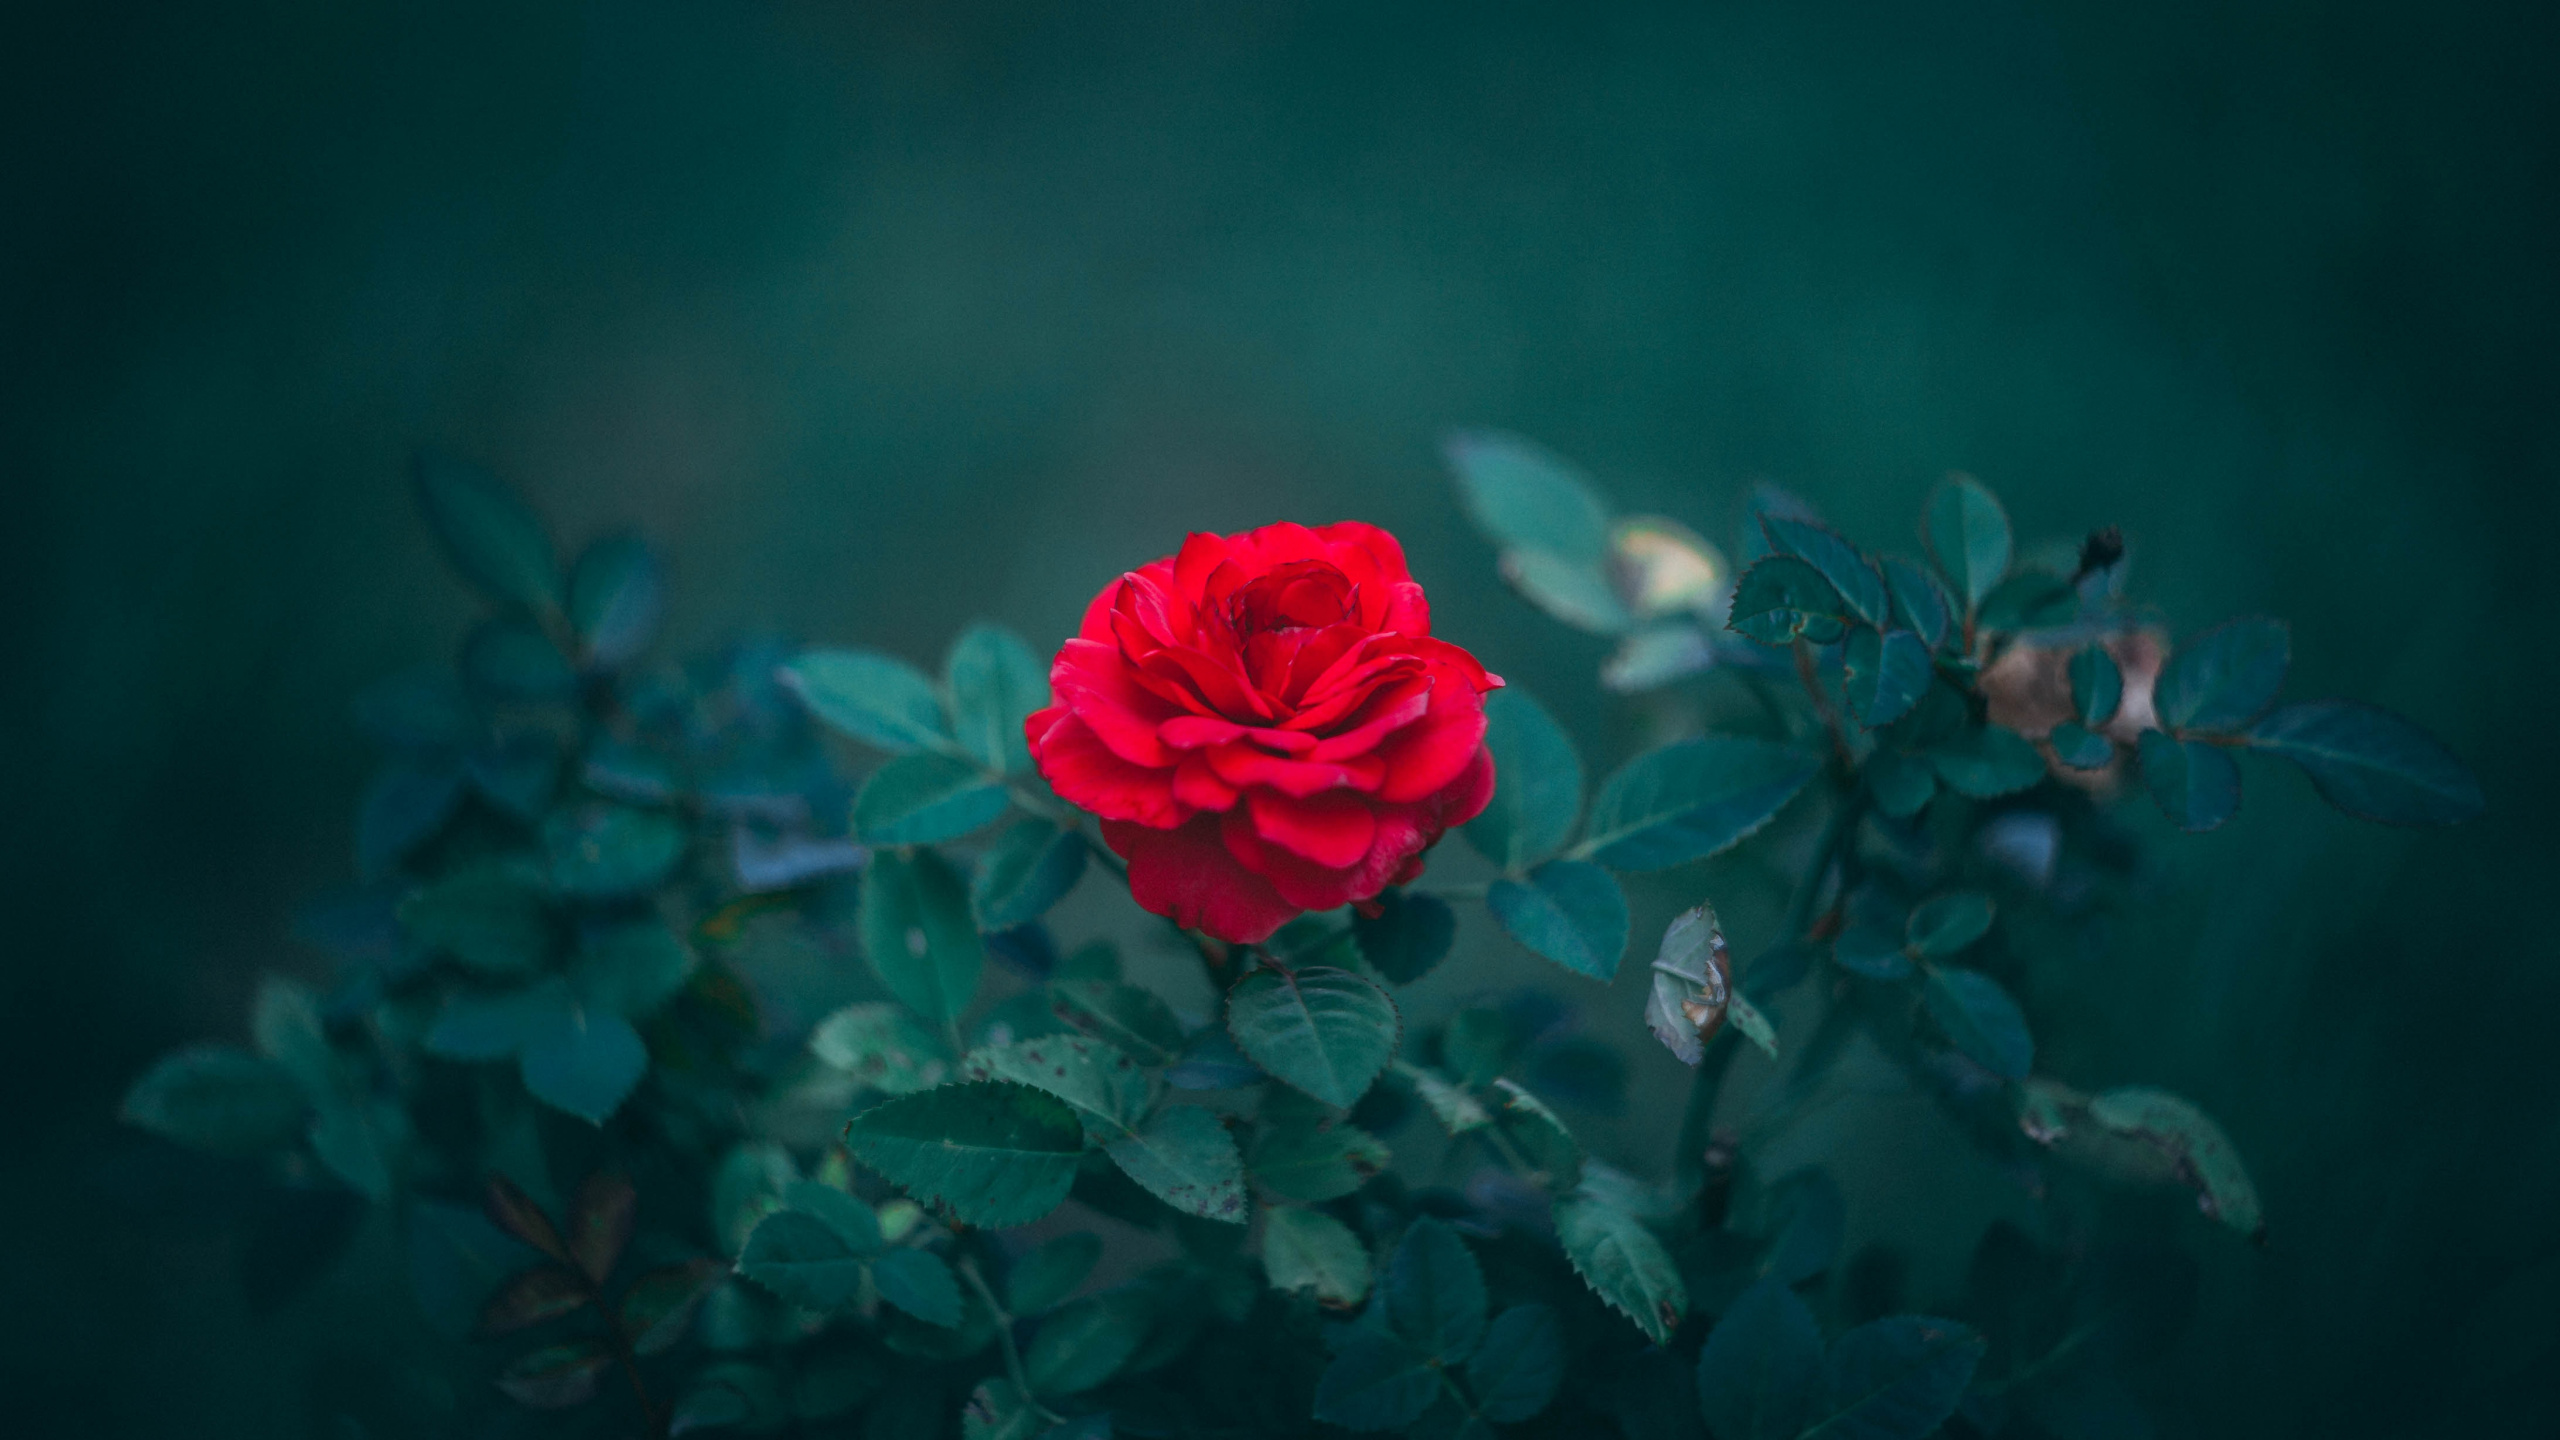 Red Rose in Bloom During Daytime. Wallpaper in 2560x1440 Resolution